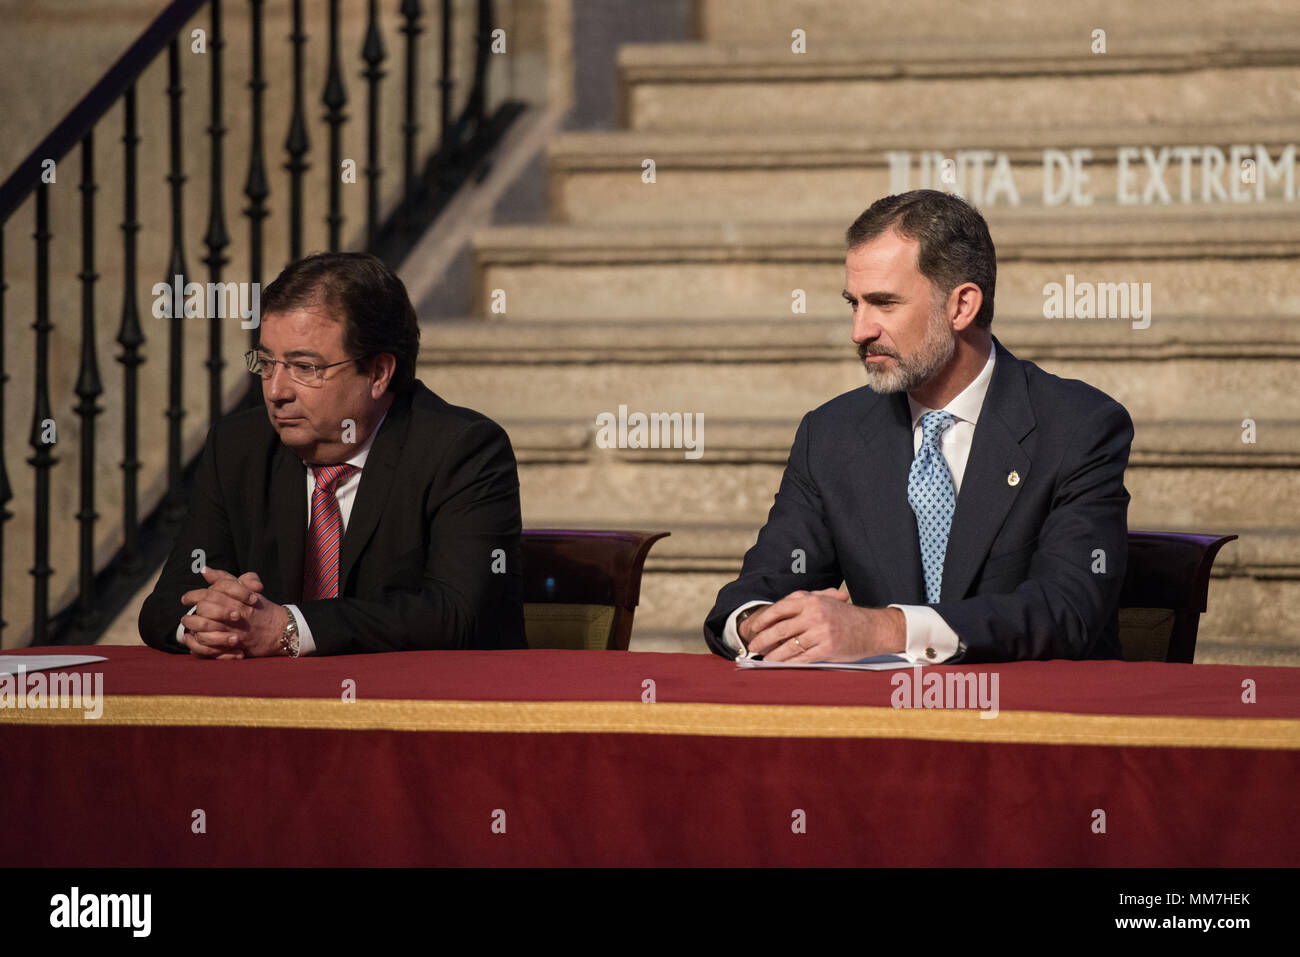 Monasterio de Yuste, Cuacos de Yuste, Spain. 9th May, 2018 - (l) Guillermo Fernández Vara Spanish politician from the Spanish Socialist Workers' Party and President of Extremadura since 2015 (r) Felipe VI, King of Spain, moments before the Carlos V Award ceremony. Credit: Esteban Martinena Guerrero/Alamy Live News Stock Photo